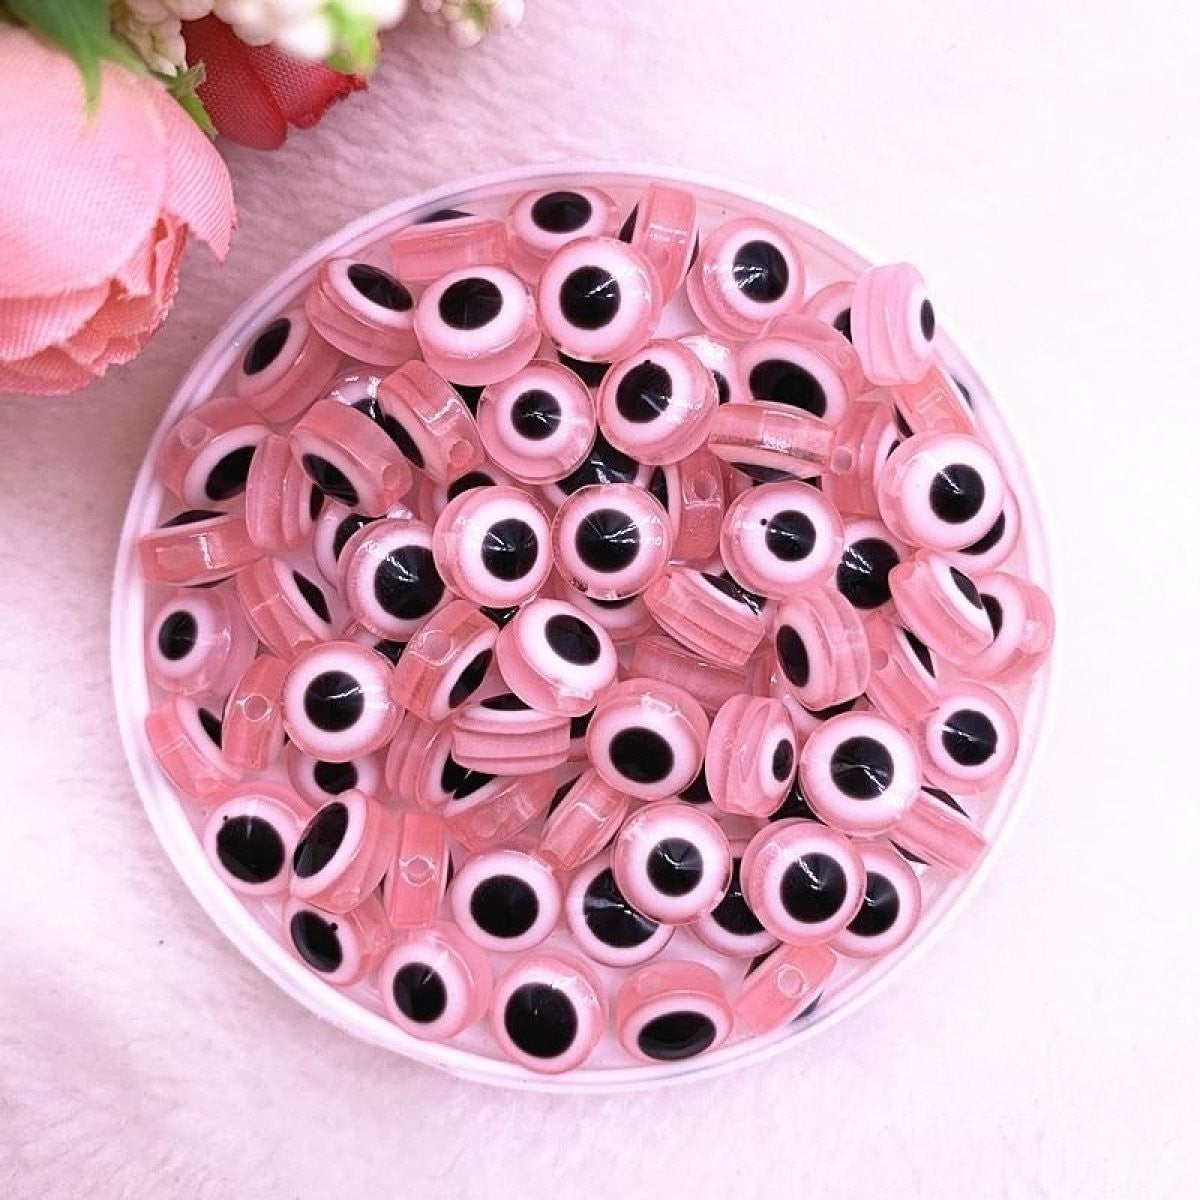 48Pcs 8/10Mm Oval Resin Spacer Beads Double Sided Eyes For Jewellery Making Diy Bracelet Set A Pink